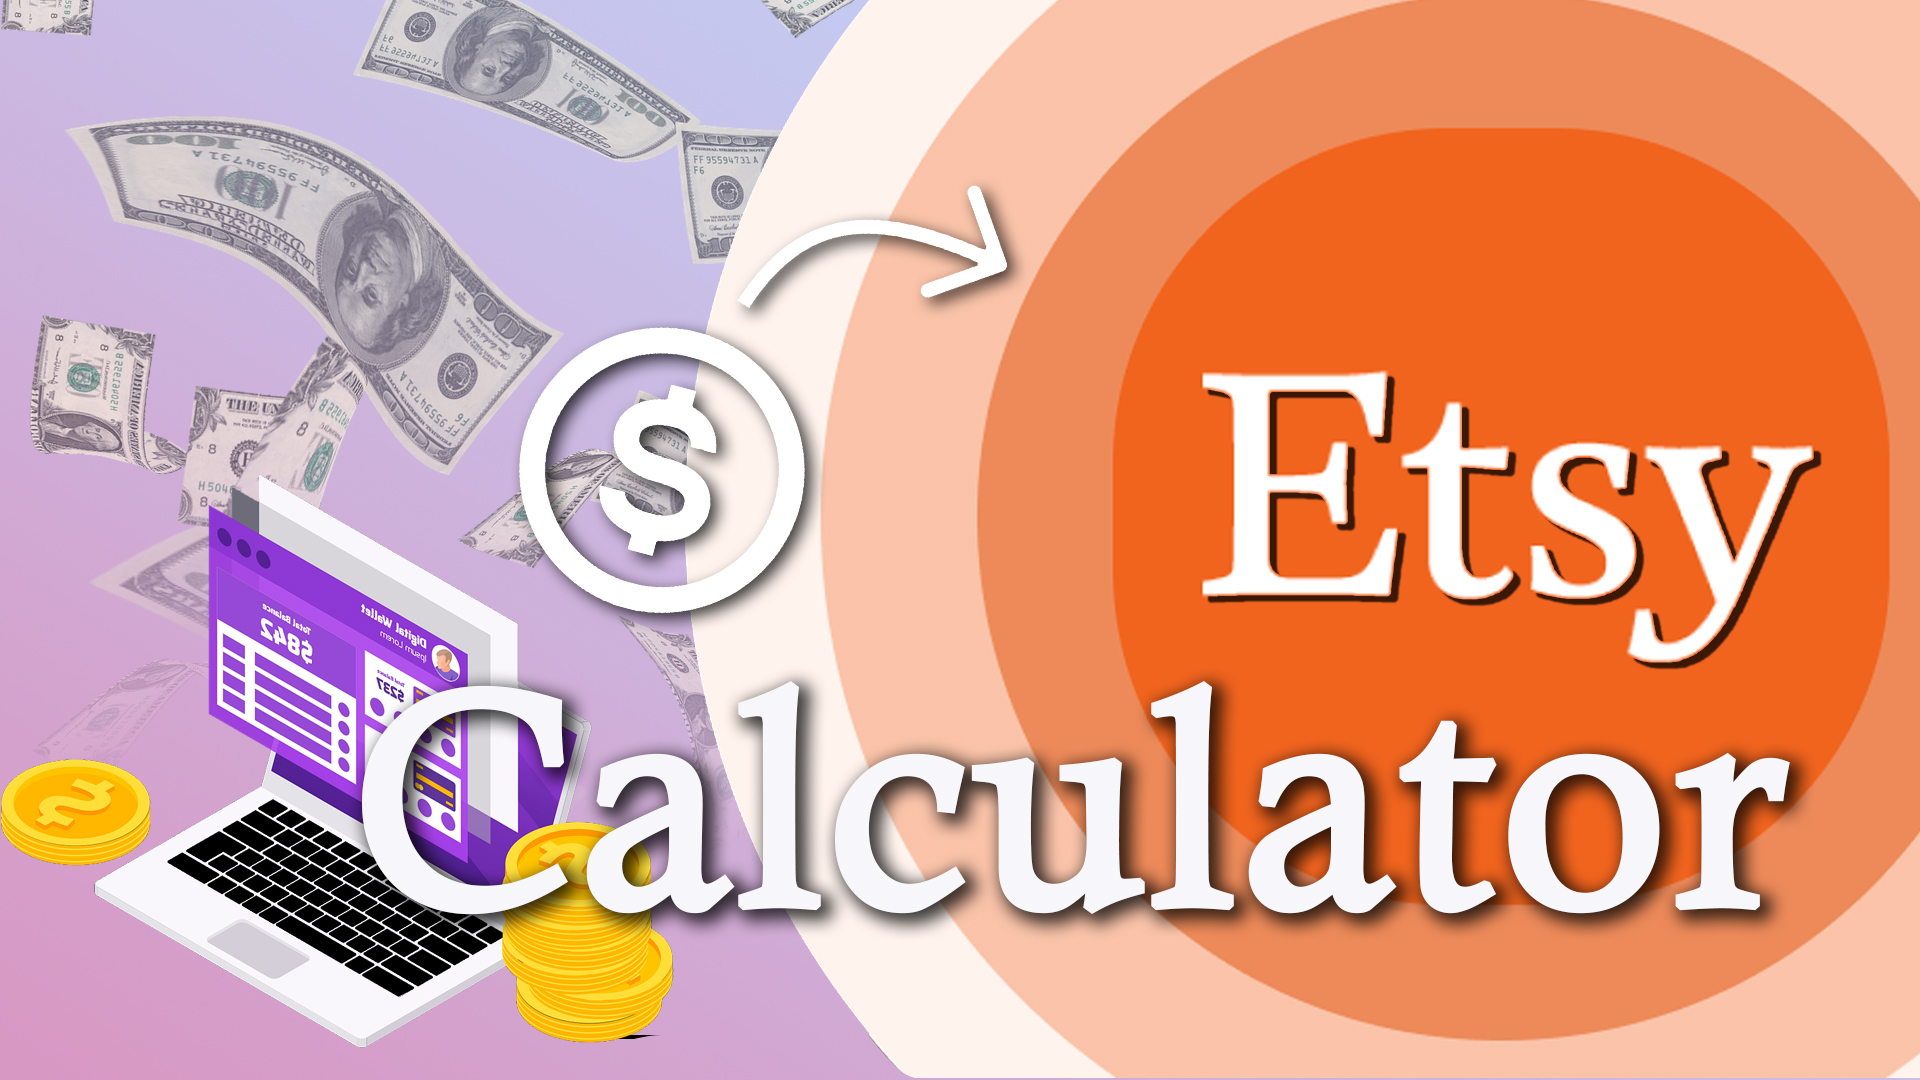 Find out quickly how much profit you can get with Esty profit calculator !